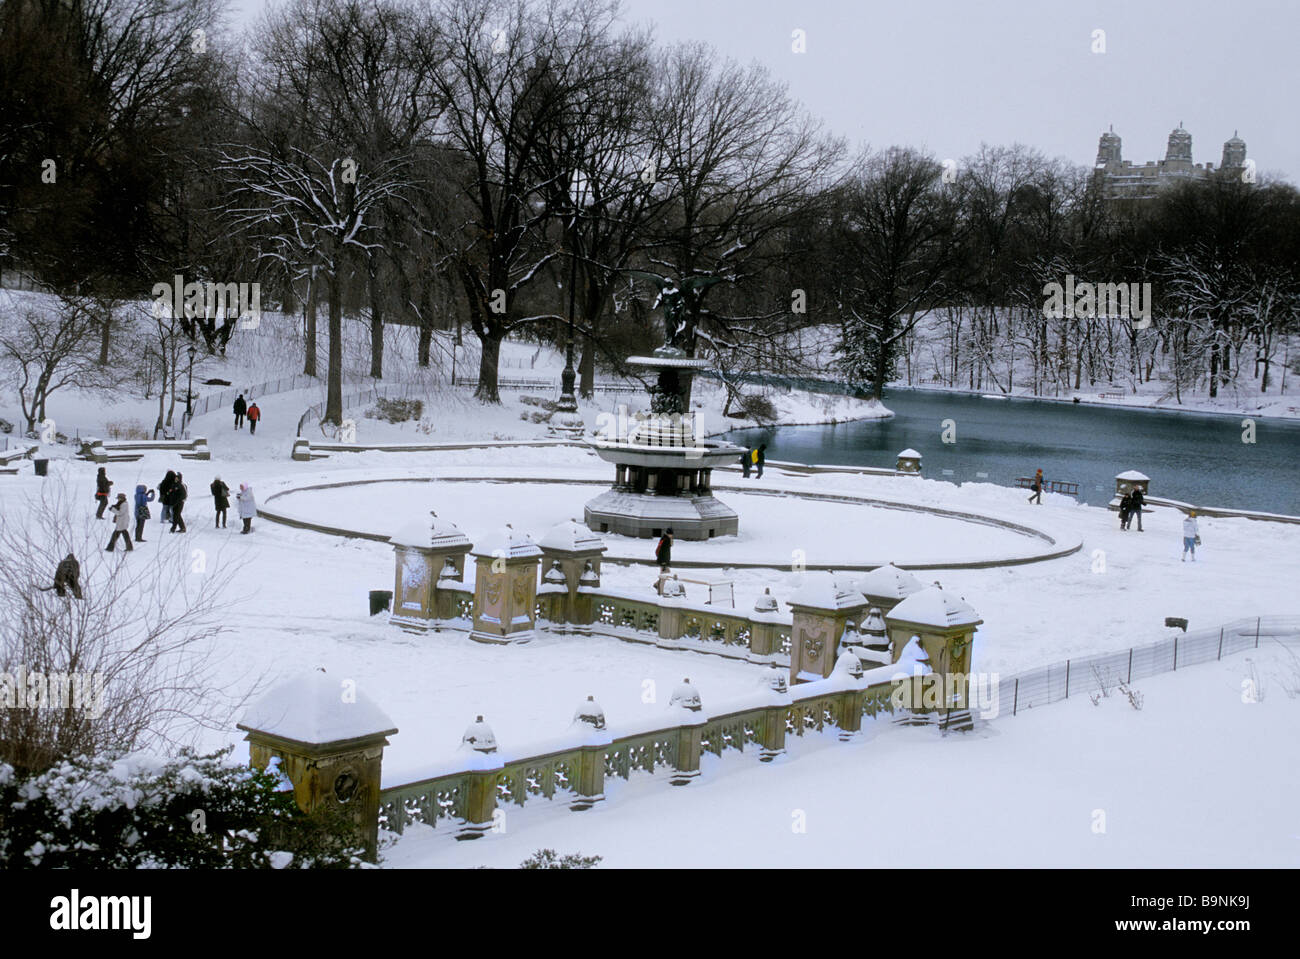 Bethesda Fountain in Central Park New York after snow storm 826276